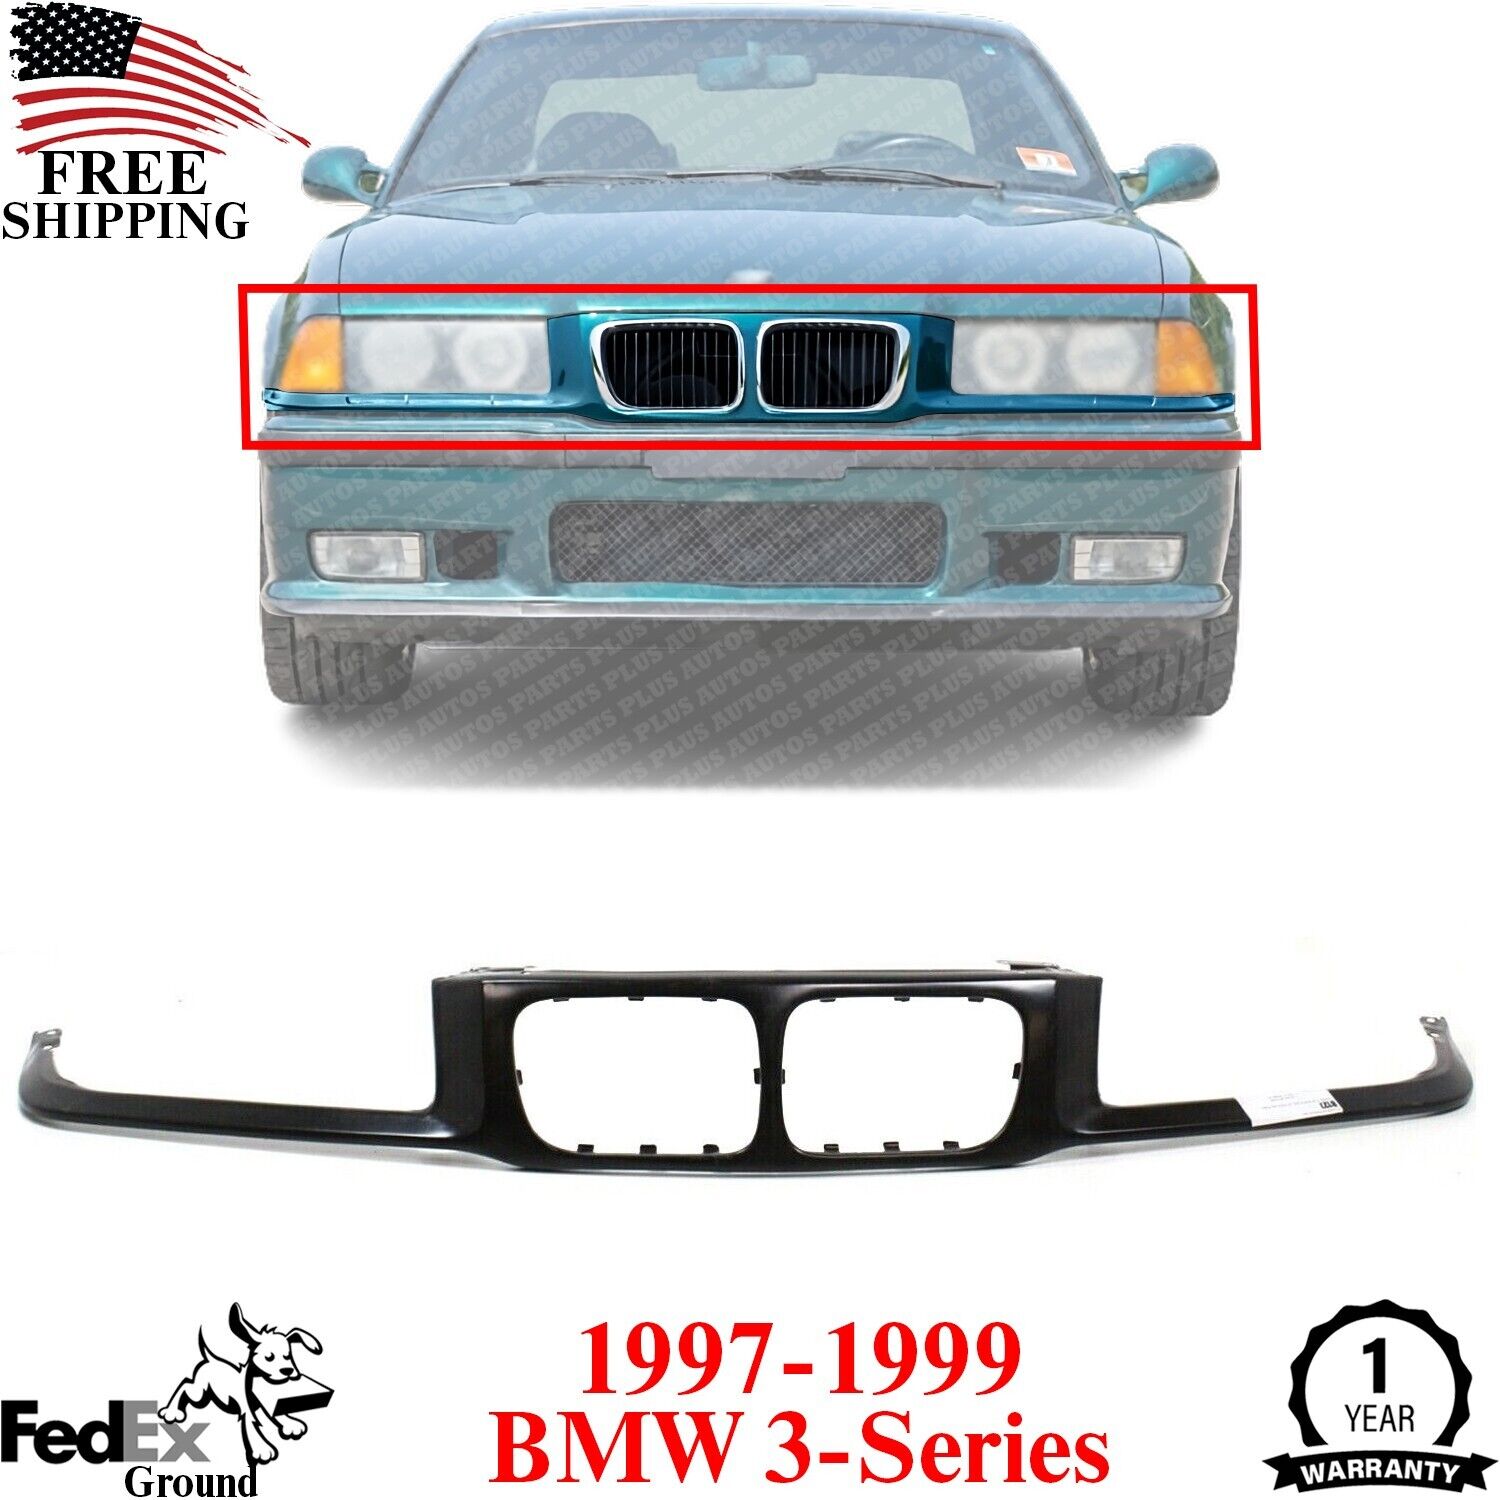 Header Headlight Grille Mounting Nose Panel Primed For 1997-1999 BMW 3-Series